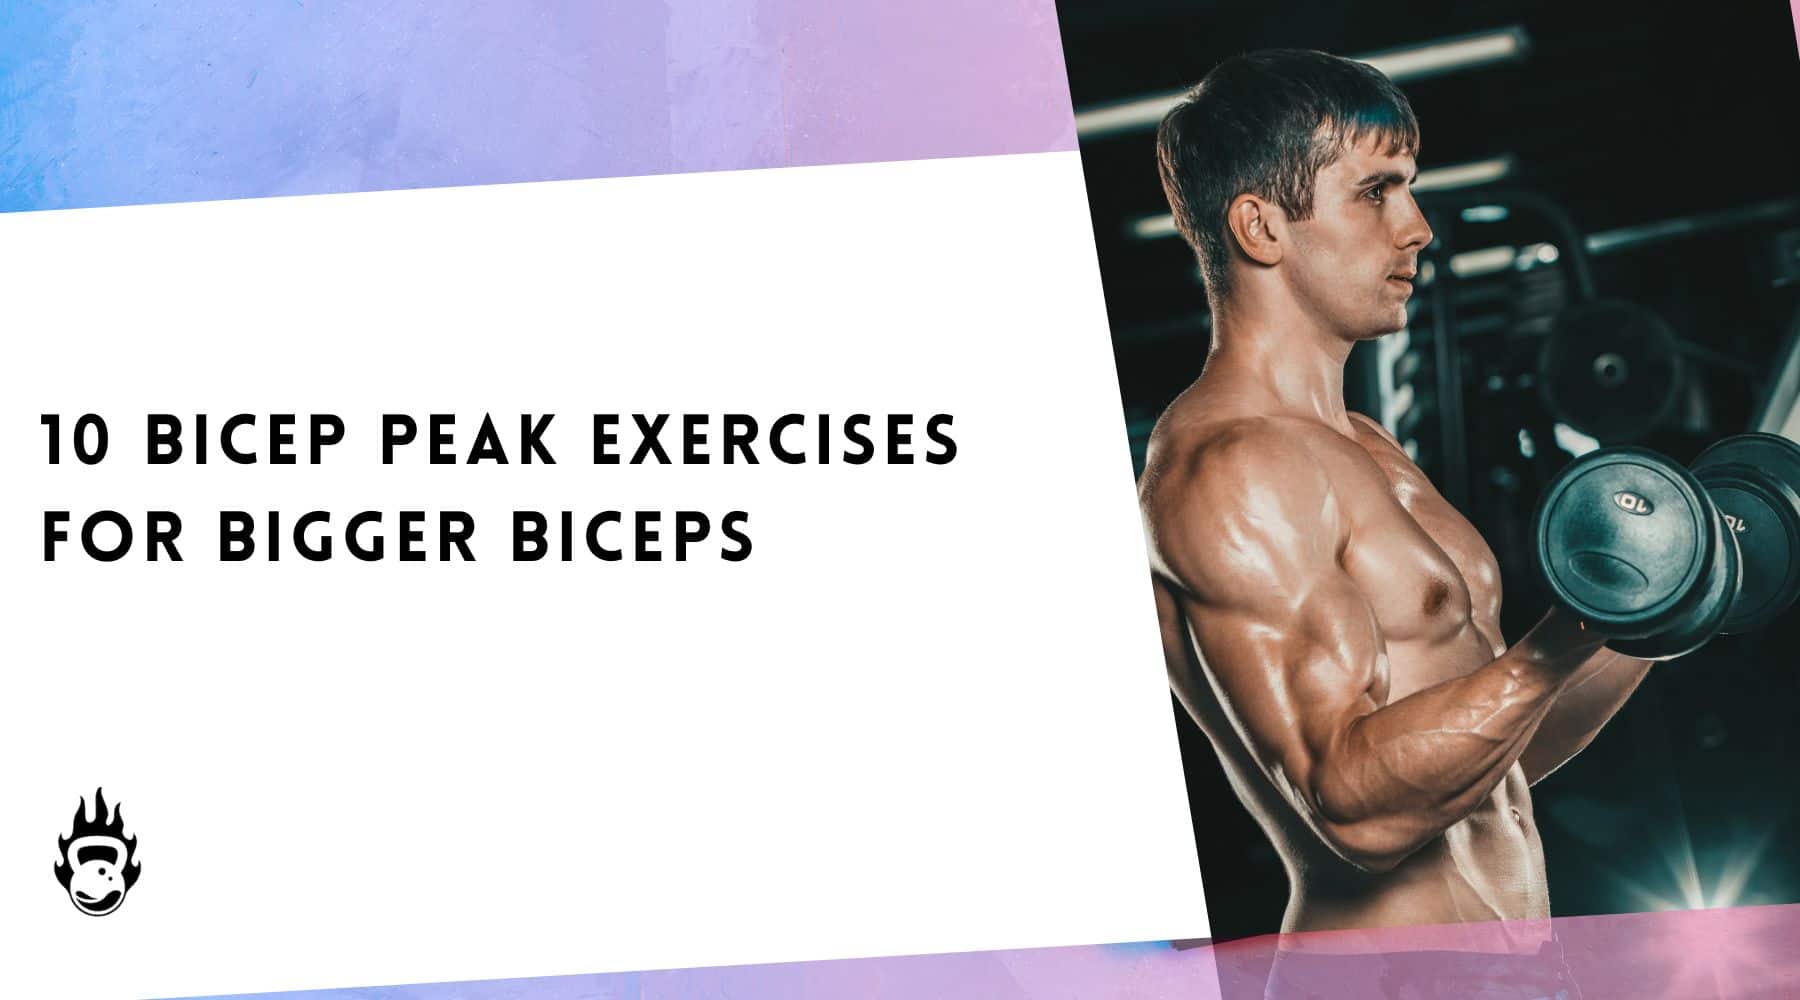 Lower Chest Cable Exercises For Bigger Stronger Chest, 50%, 60% OFF